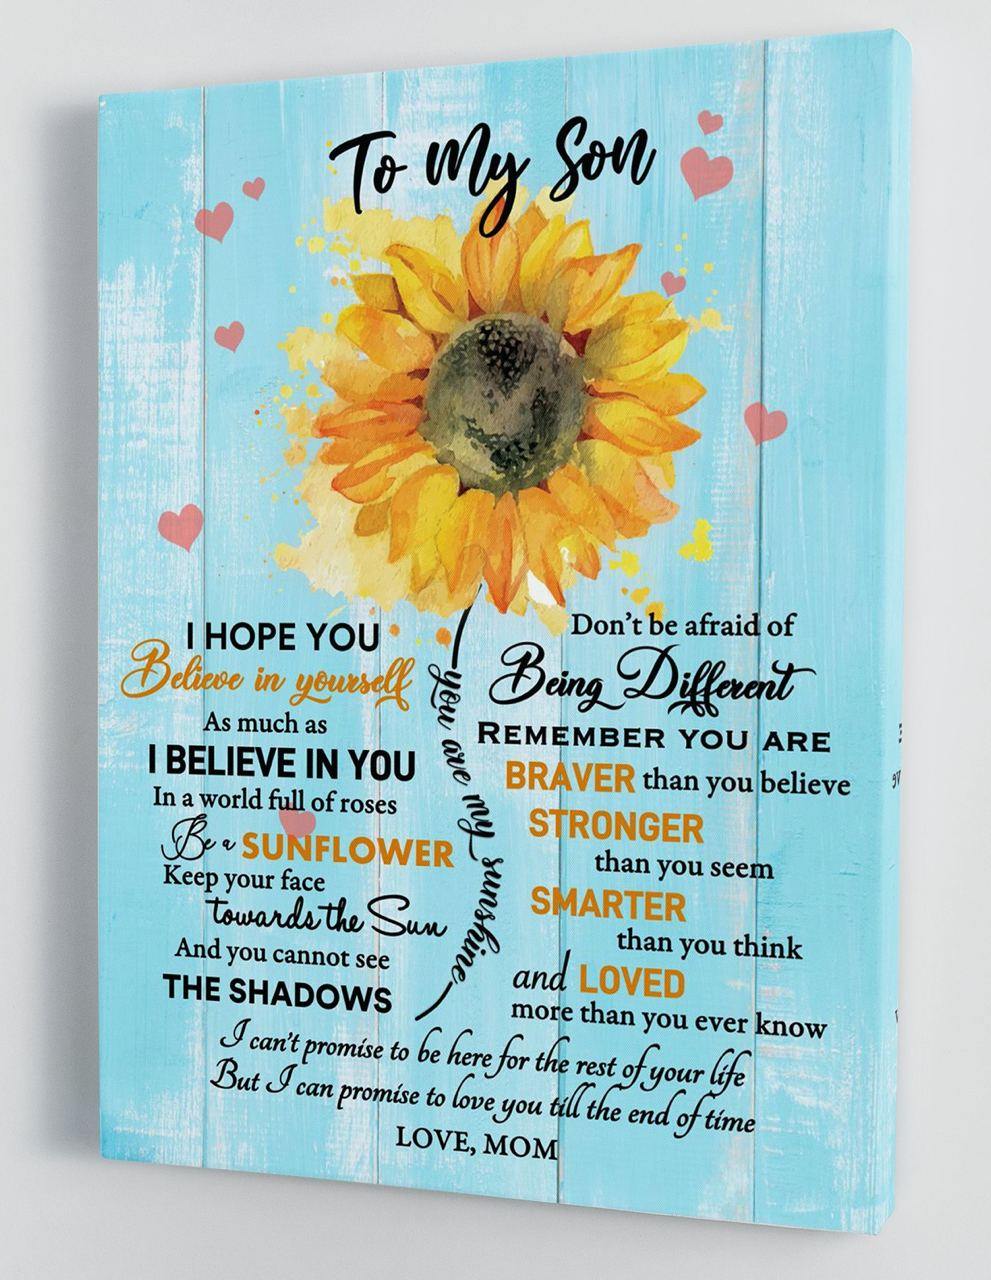 To My Son - From Mom - Framed Canvas Gift MS051 - DivesArt LLC